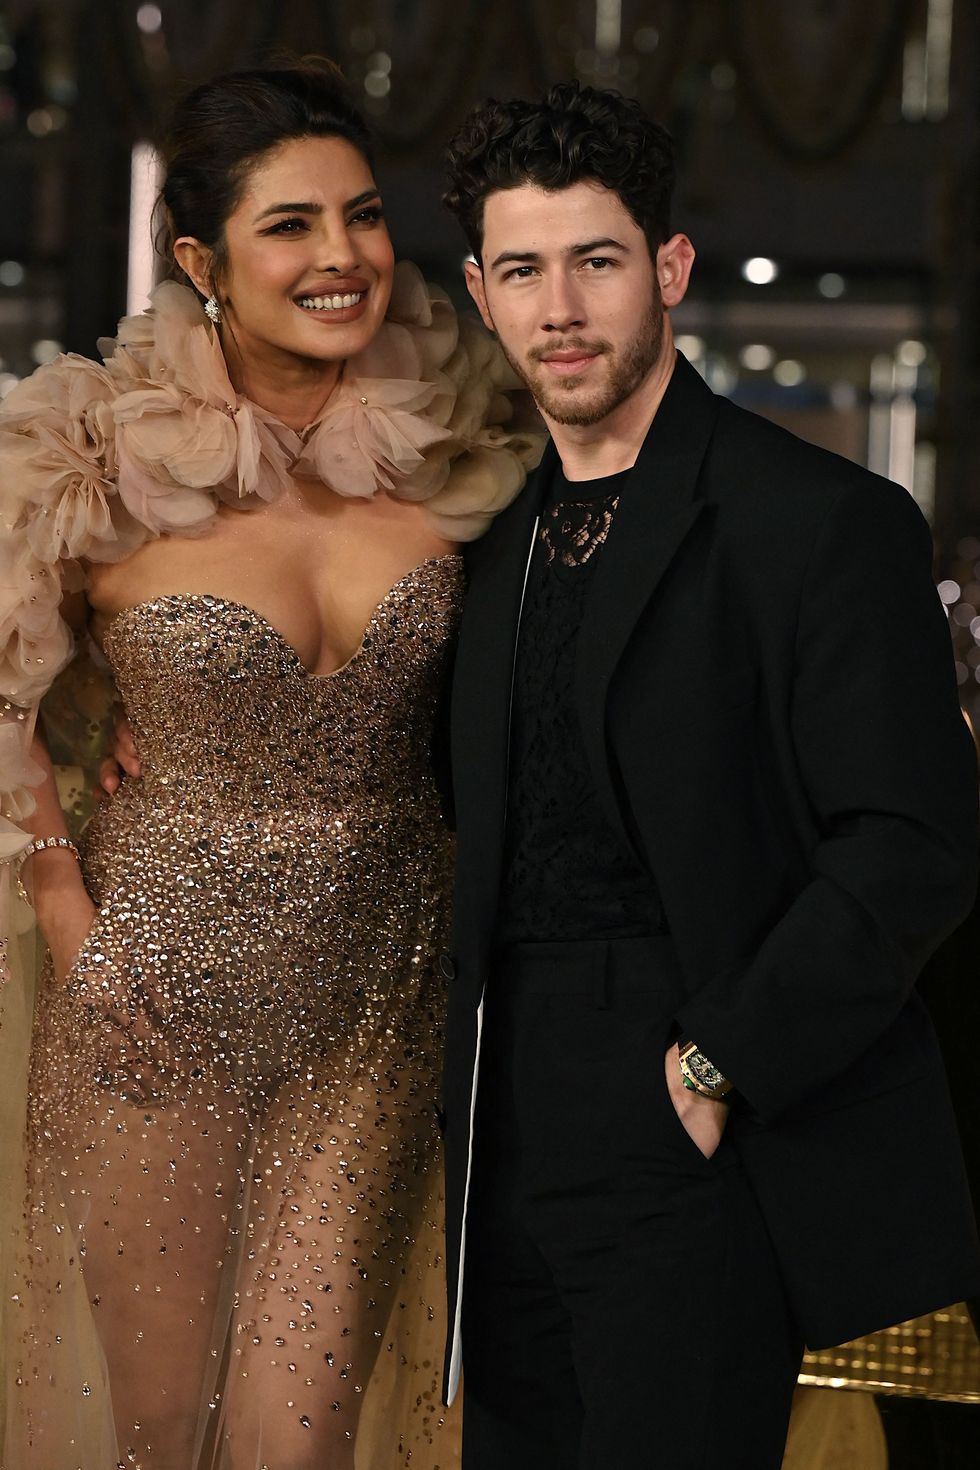 bollywood actress priyanka chopra and her husband musician nick jonas pose for pictures during the inauguration of the cultural centre nmacc at the jio world centre jwc in mumbai on march 31, 2023 photo by sujit jaiswal afp photo by sujit jaiswalafp via getty images